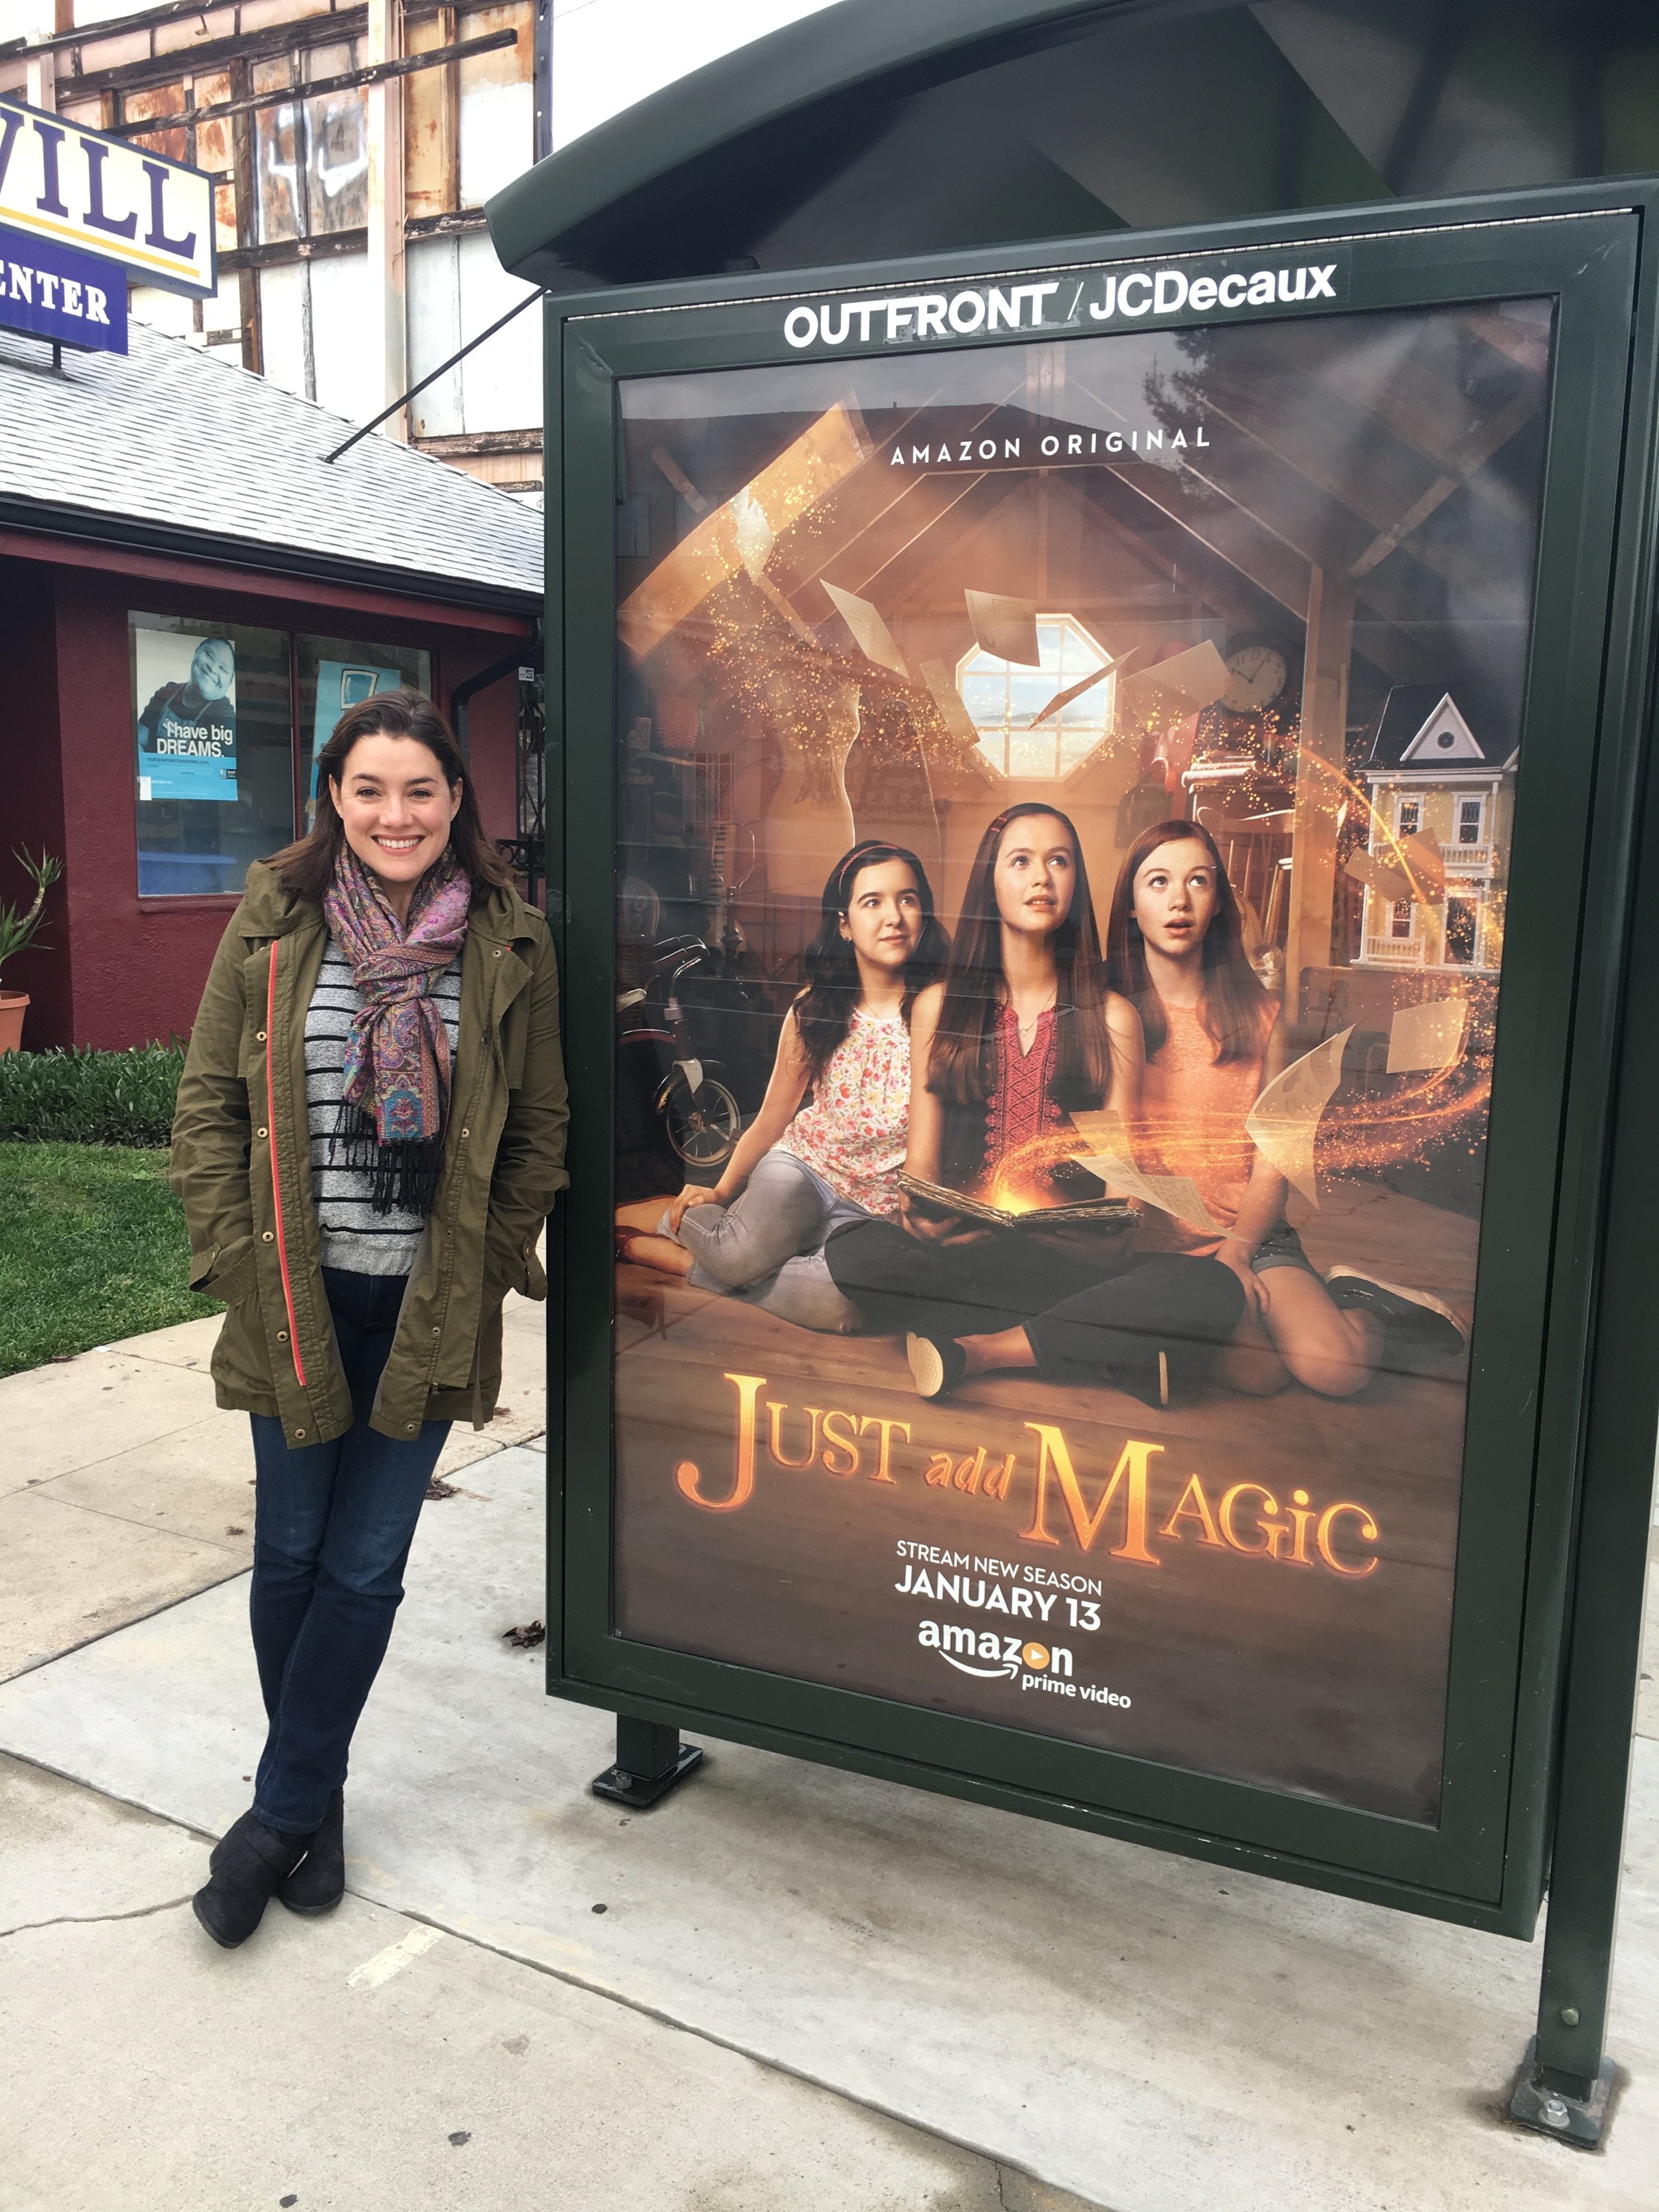 Catia Ojeda next to an advertisement for "Just Add Magic."